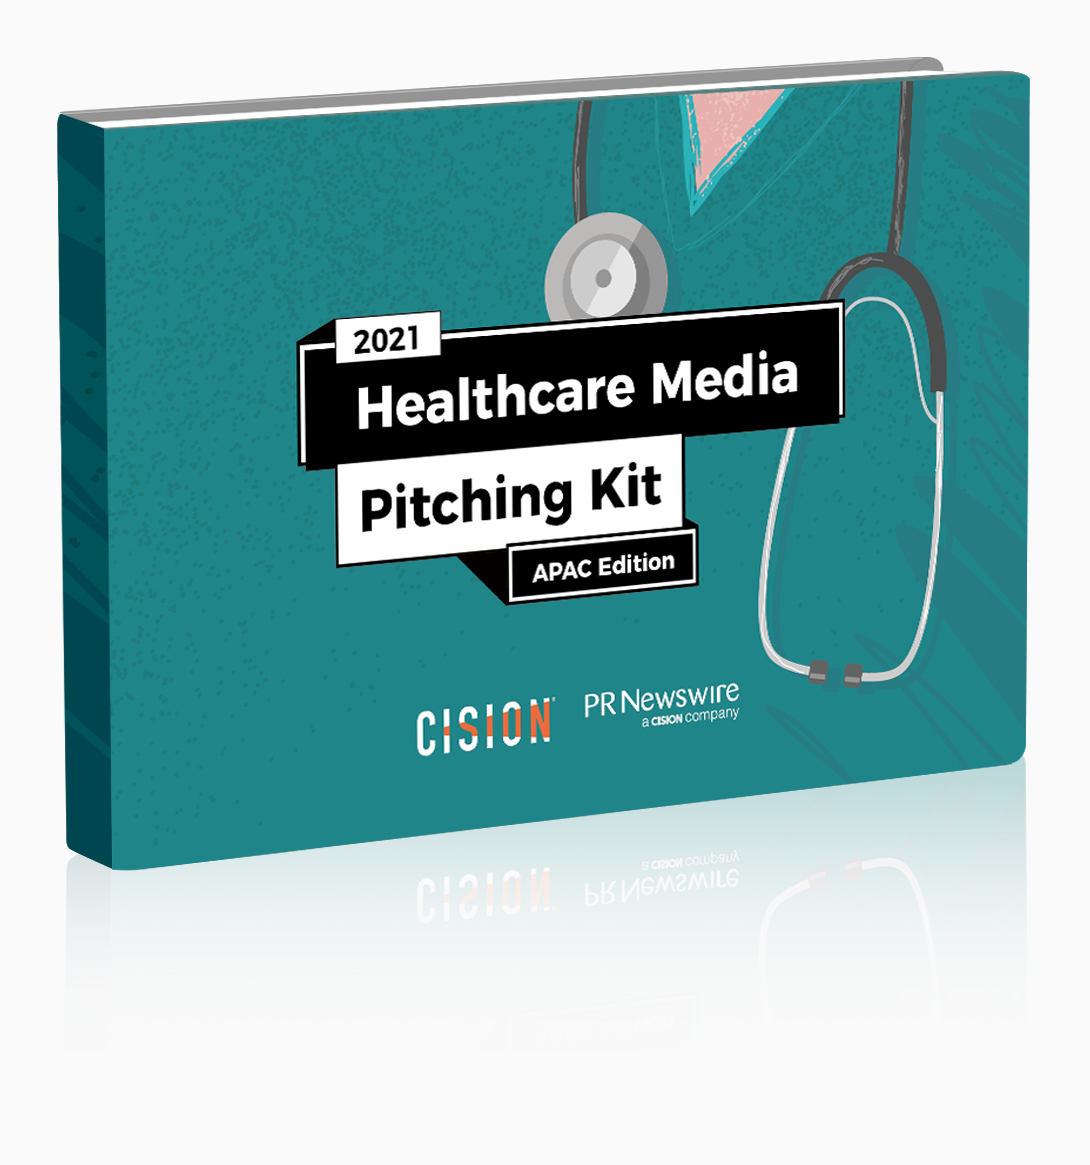 2021 Healthcare Media Pitching Kit (APAC Edition)